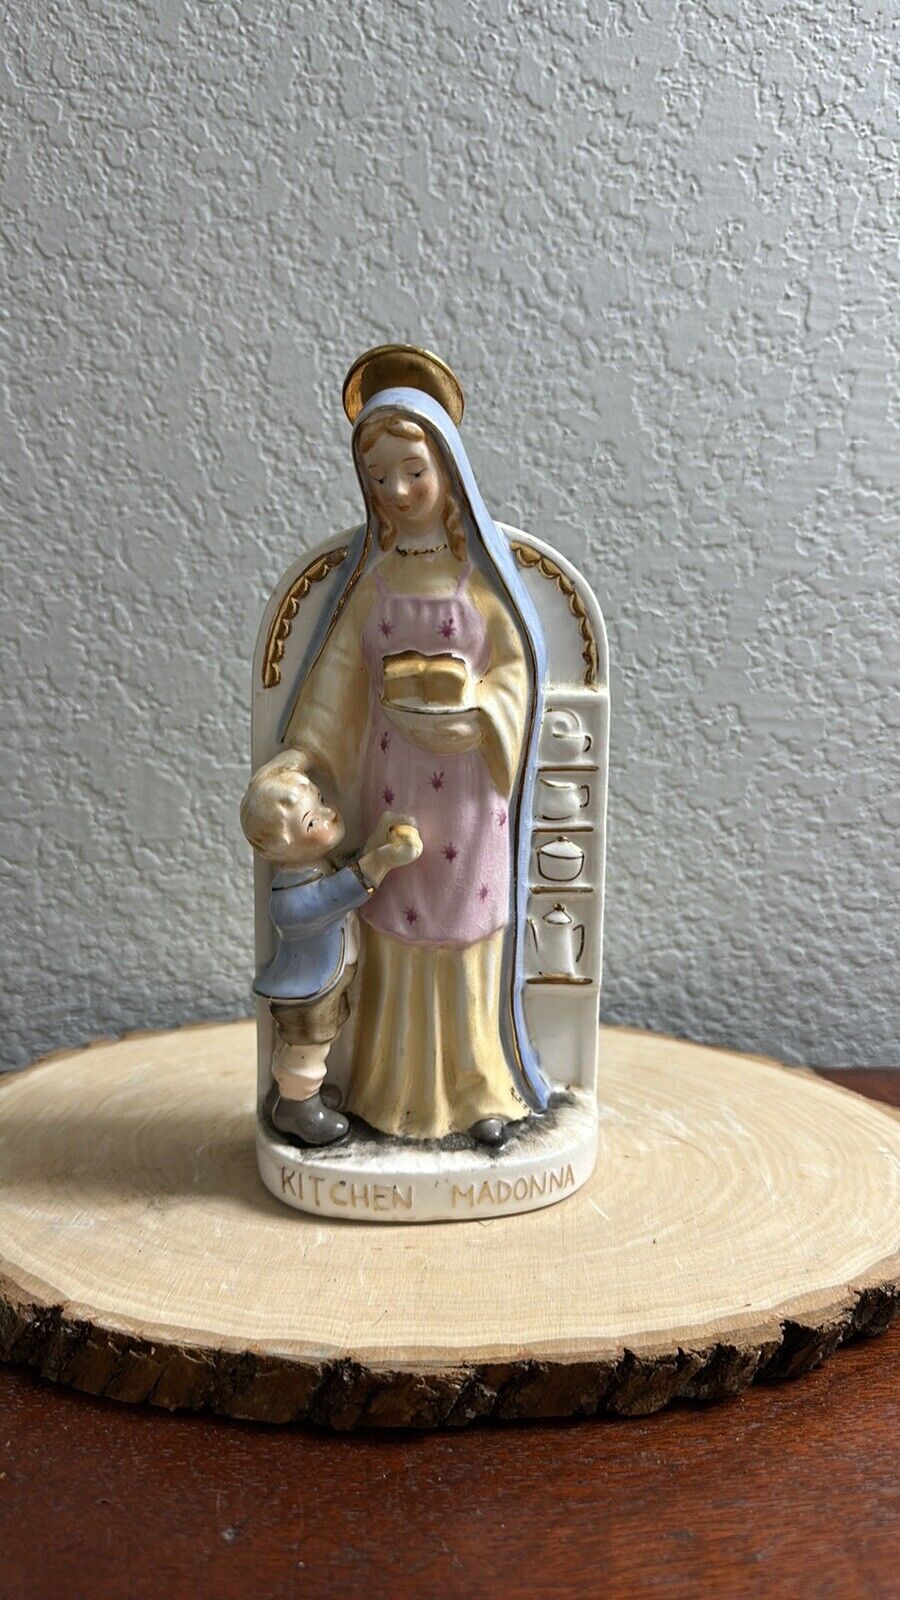 Vintage 1959 Madonna of the Kitchen Ceramic Wall Hanging Mary Excellent